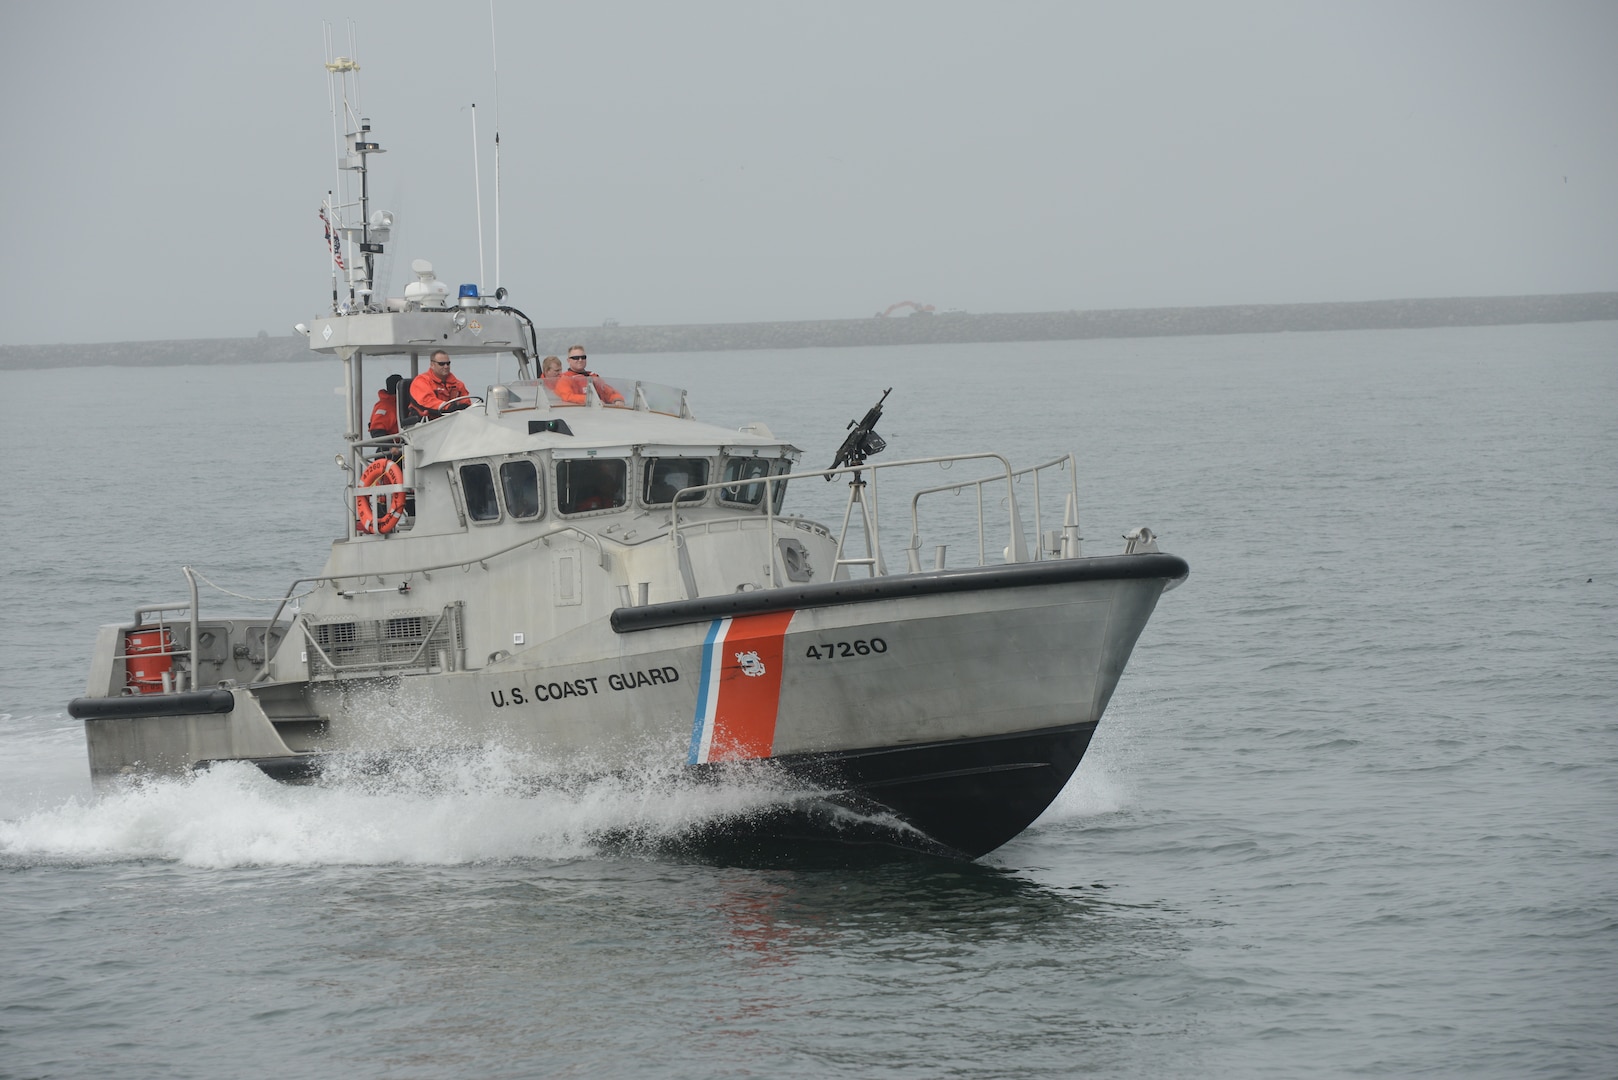 A Coast Guard boat crew aboard a 47-foot Motor Life Boat with a mounted M-240 weapon system returns to its base in Ilwaco, Wash., after a training exercise was cancelled, Aug. 29, 2018.

The live-fire training exercise was cancelled because the required three miles of visibility was not available.